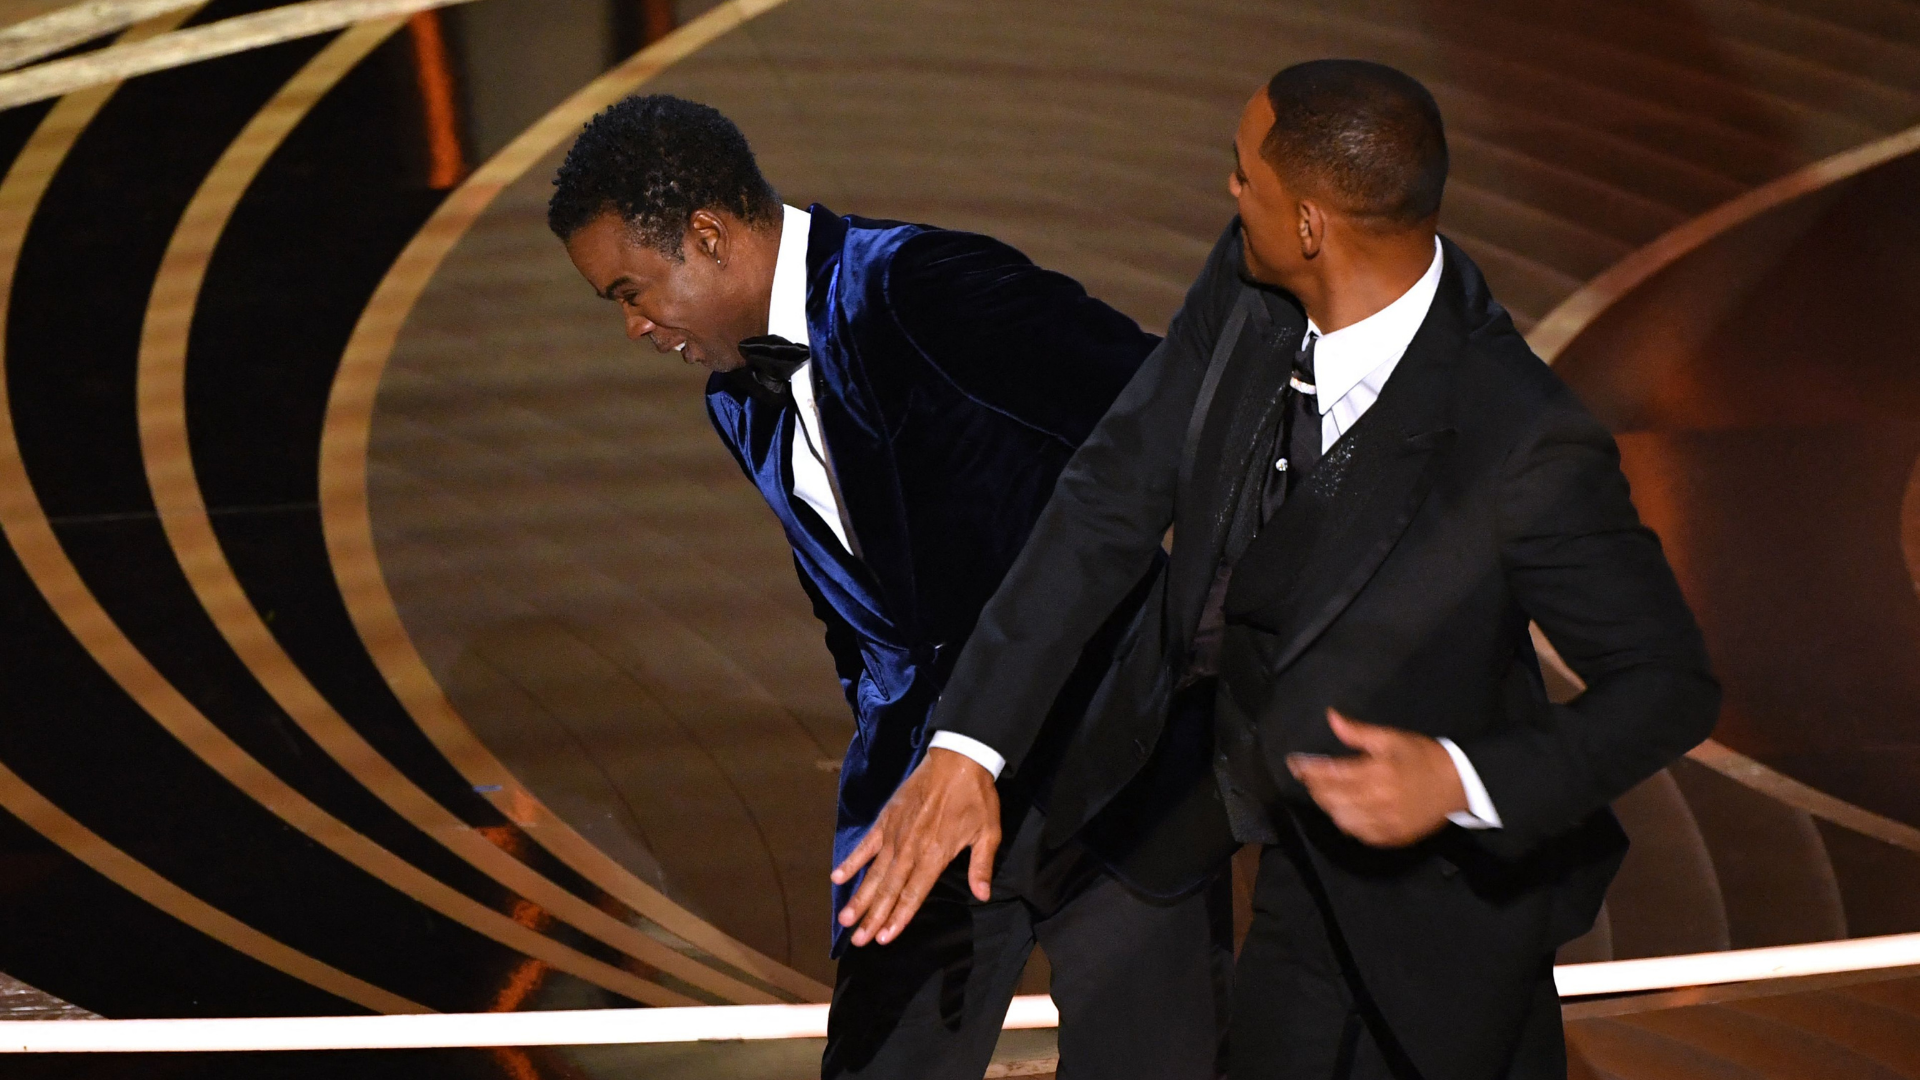 Will Smith delivers a smackdown to Chris Rock 